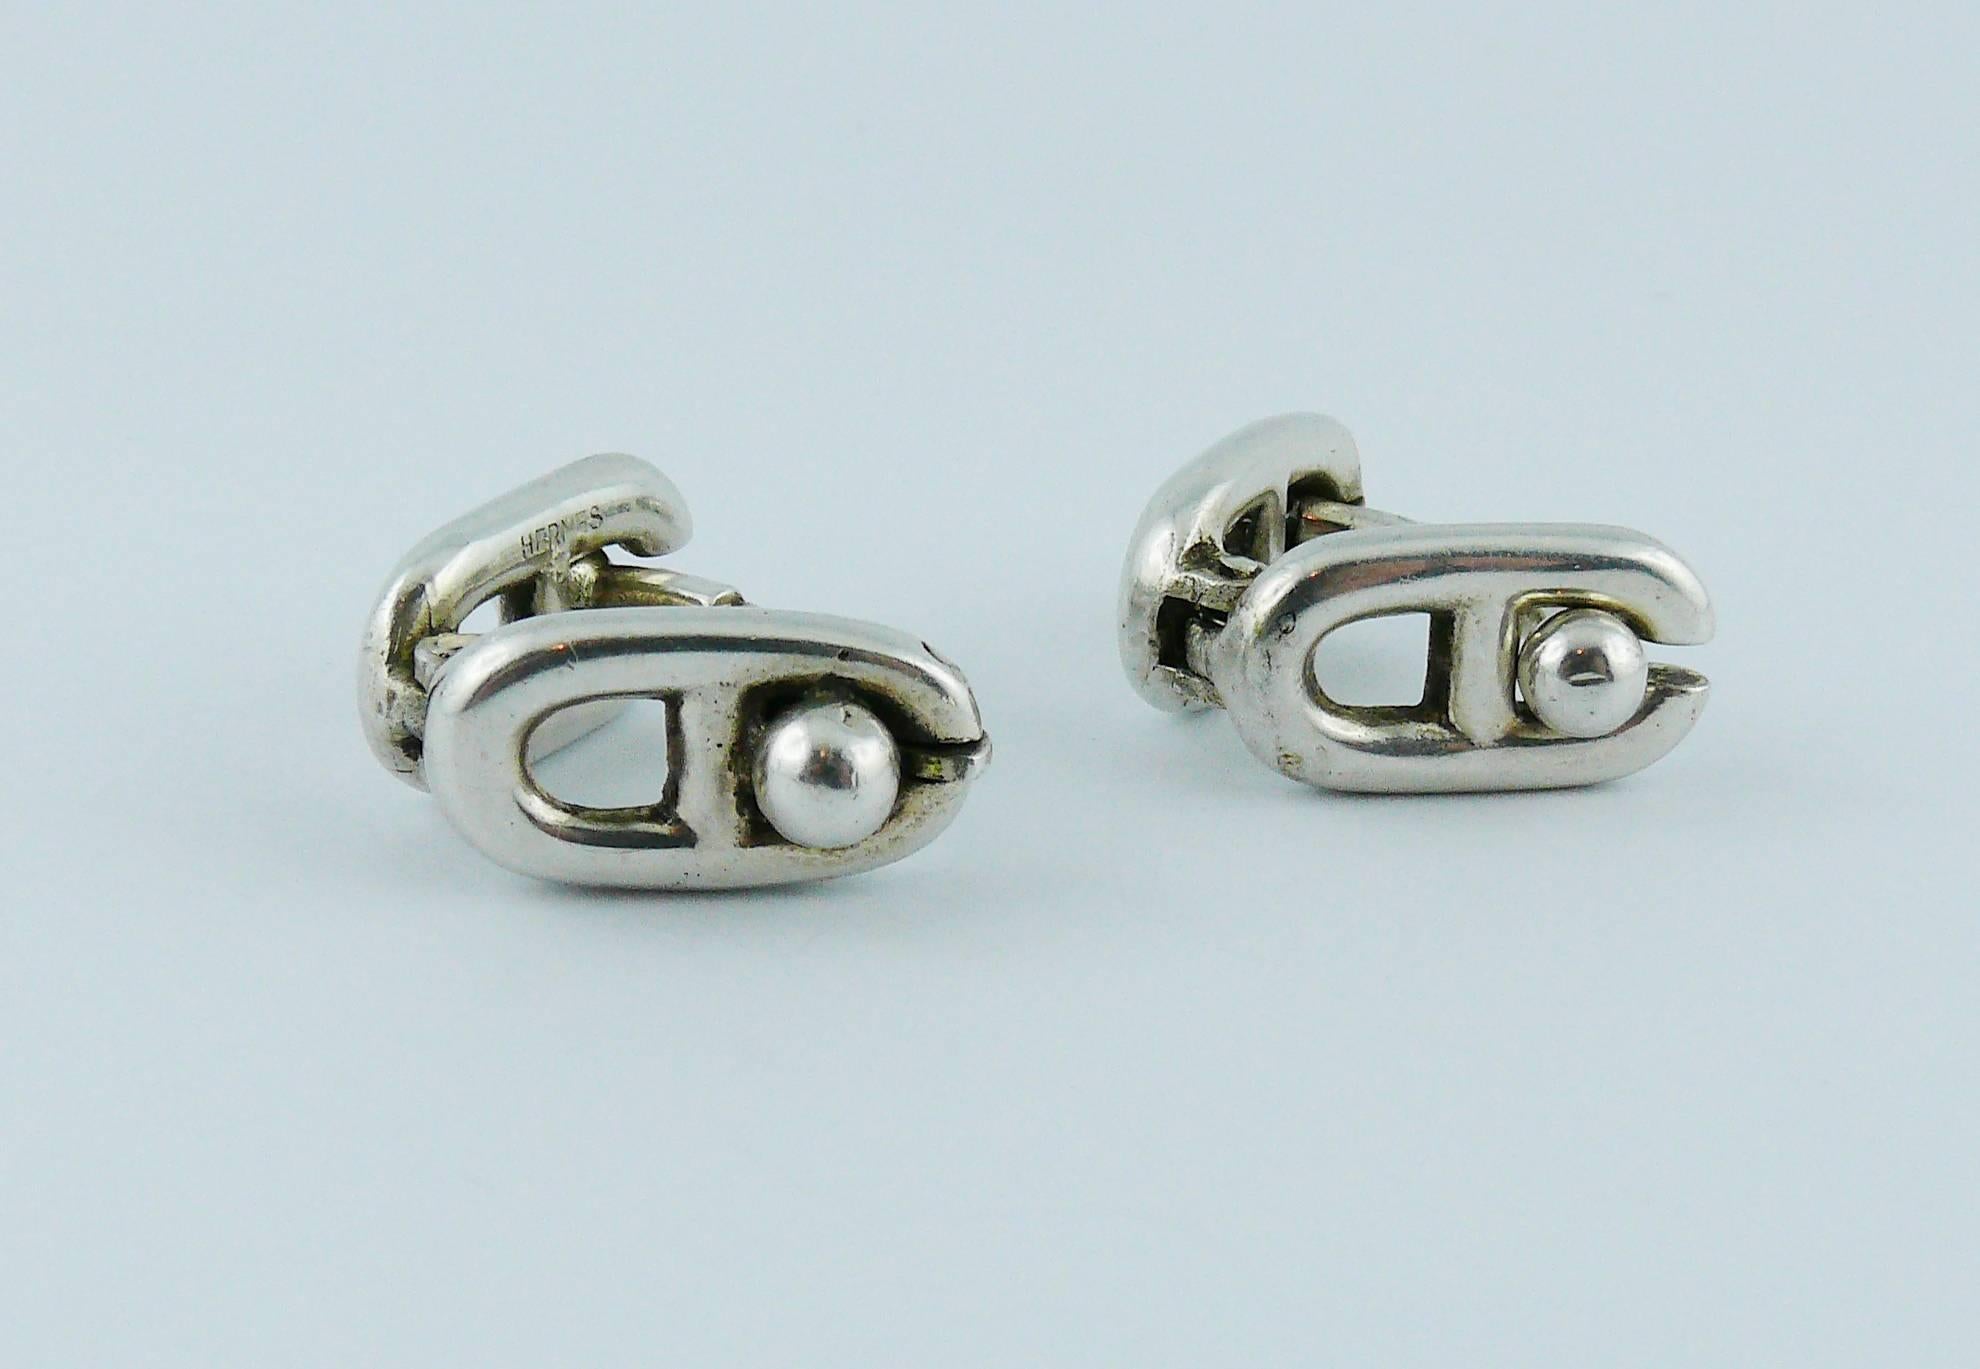 HERMES vintage "Chaine d'Ancre" silver cufflinks.

Embossed HERMES and numbered on one cufflink (the other has no HERMES marking).
Both cufflinks have French silver hallmark "Crab".

Indicative measurements : max. height approx.